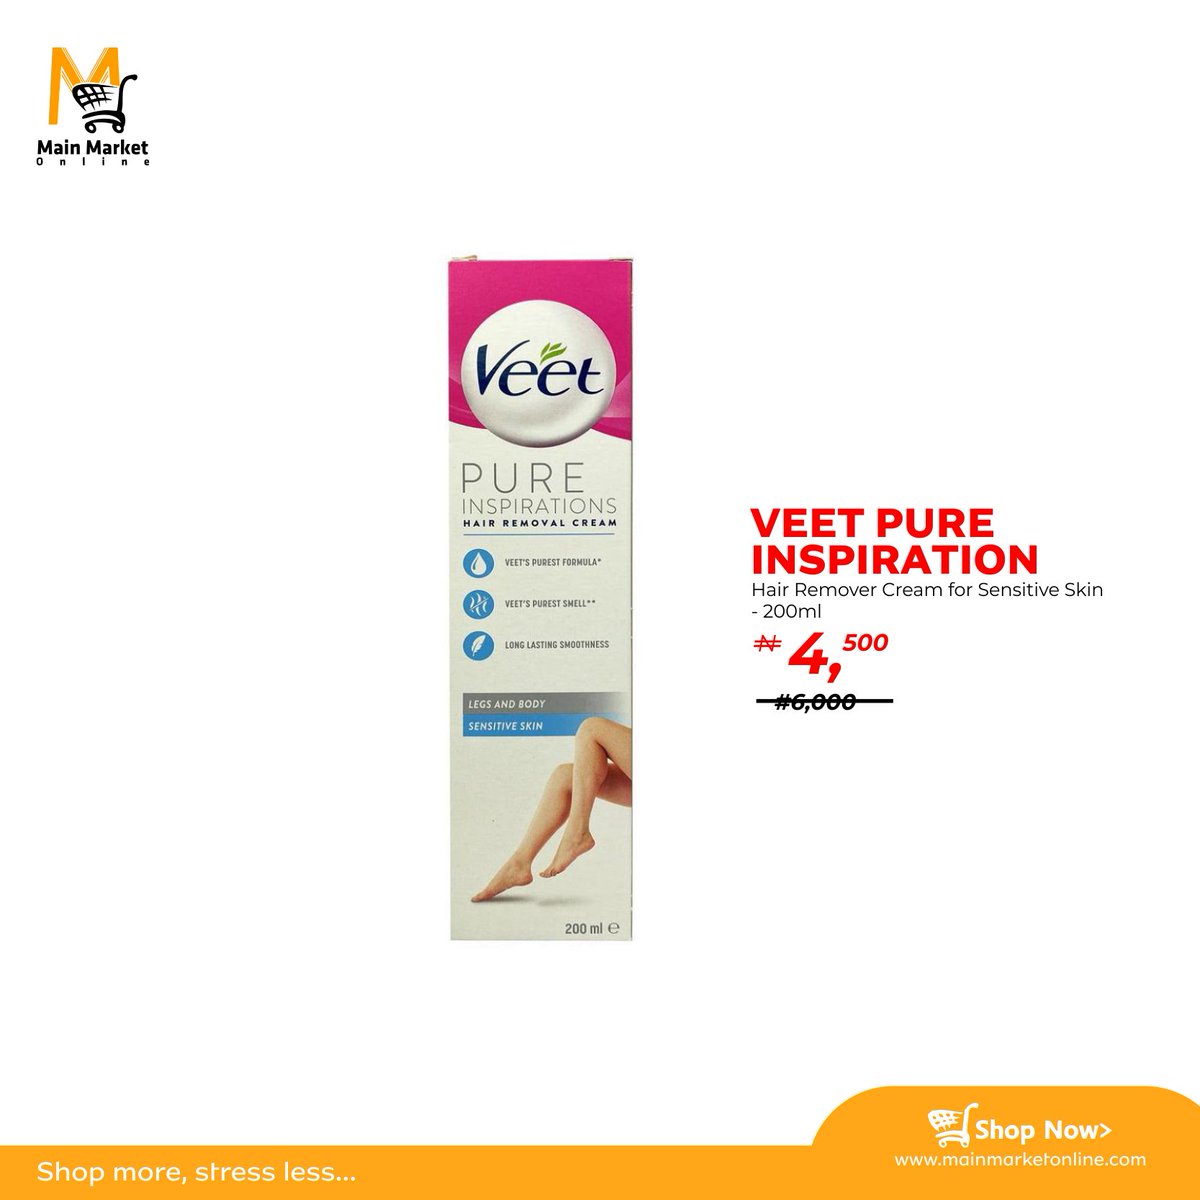 Get the smooth, moisturised & glowing skin you always wanted!

Veet Pure Inspirations, made with natural extract, gets rid of even the most stubborn hair in the most sensitive part of your body. Order now on MainMarketOnline!
#MMO #MainMarketOnline #VeetPure #OnlineShop #ShopNow